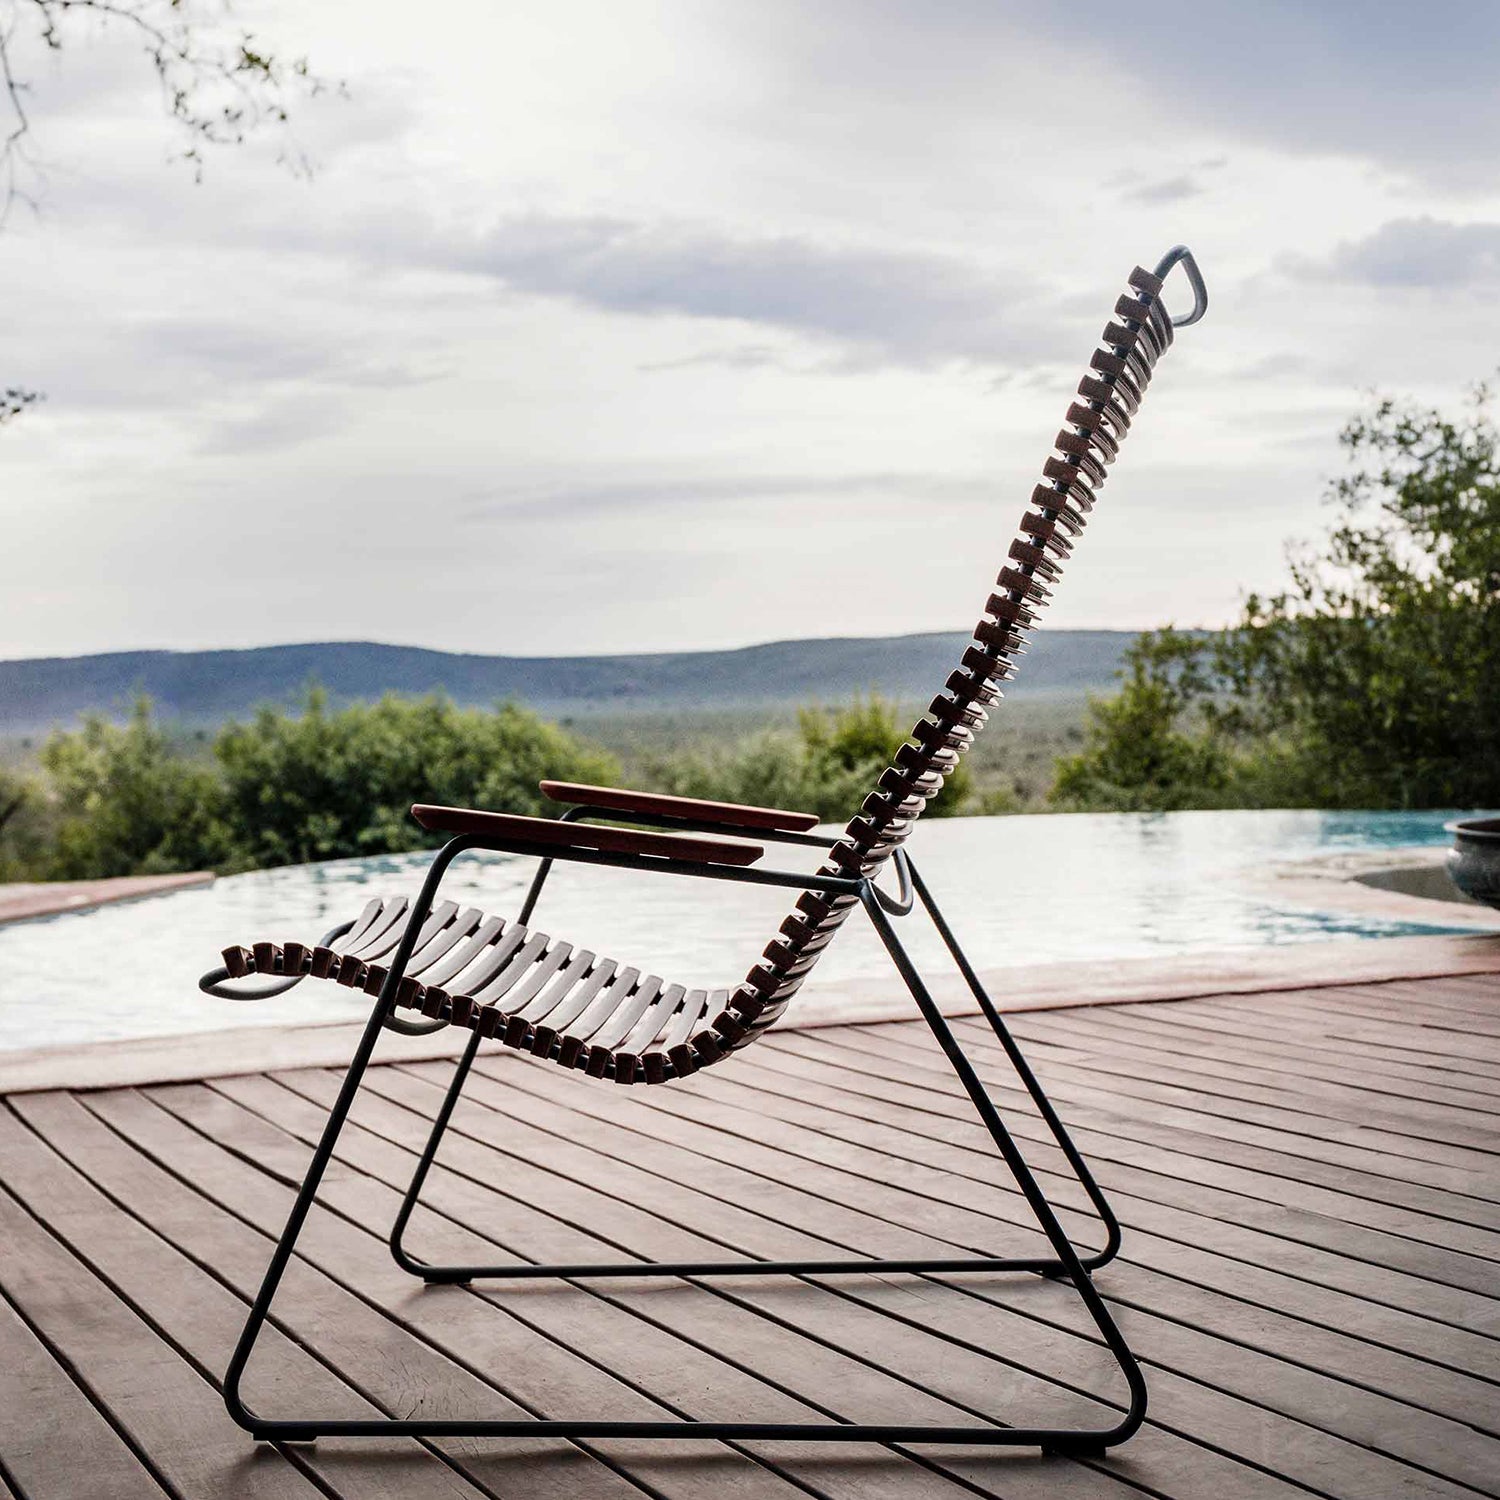 Click Lounge Chair - The Design Choice